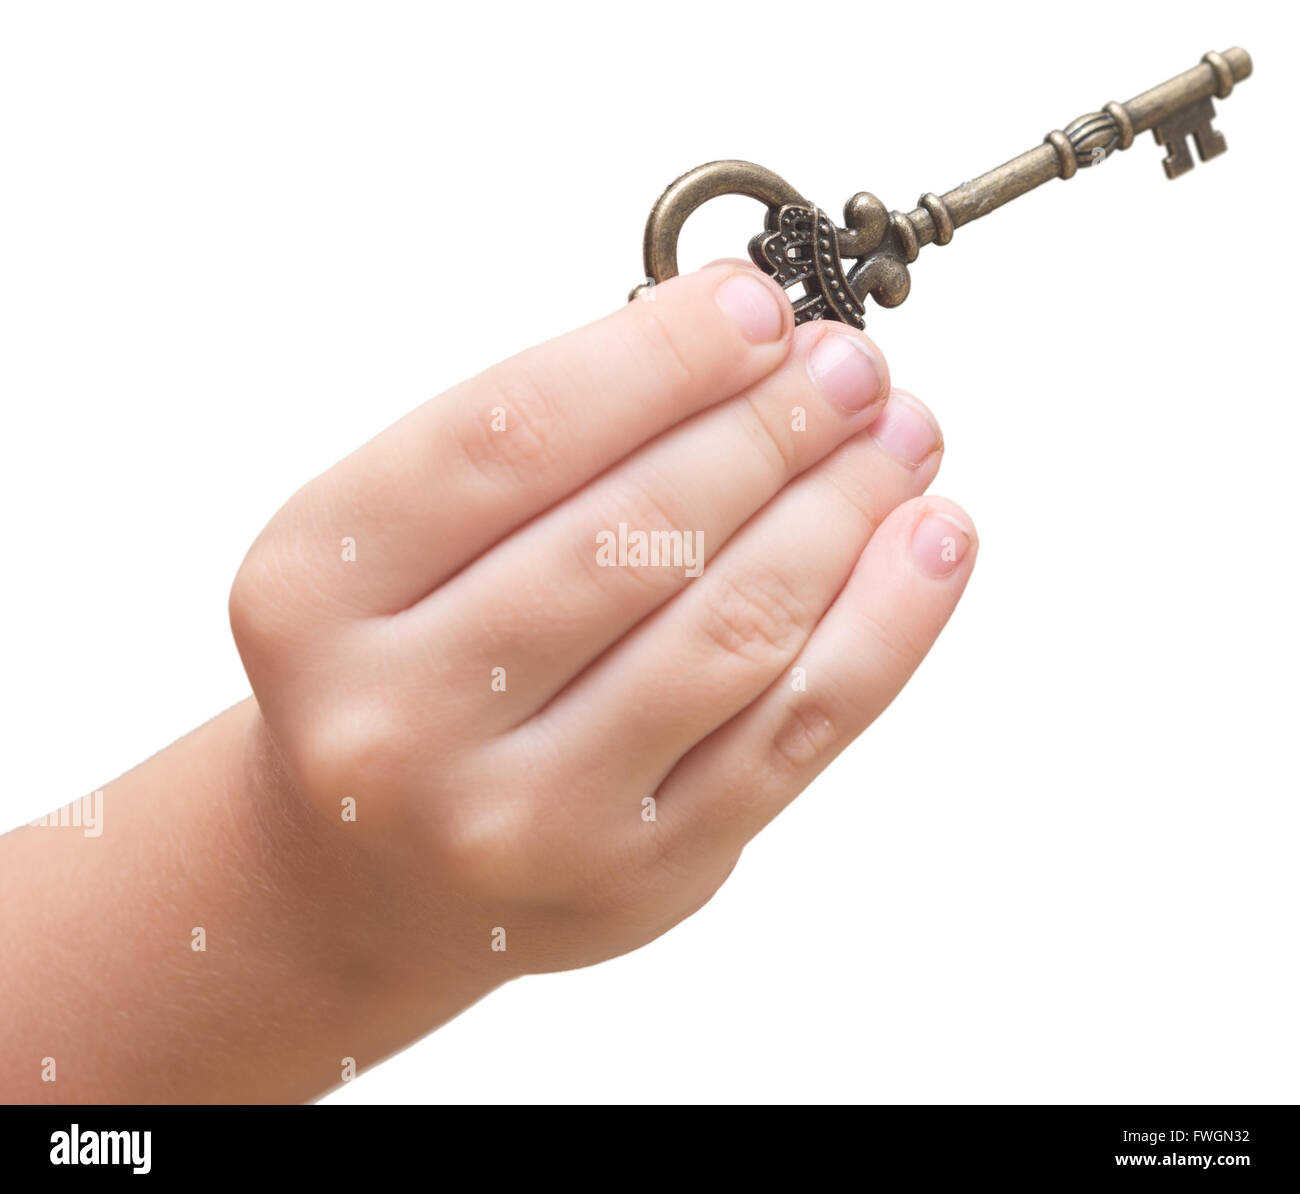 old key in a baby hands isolated on white background Stock Photo